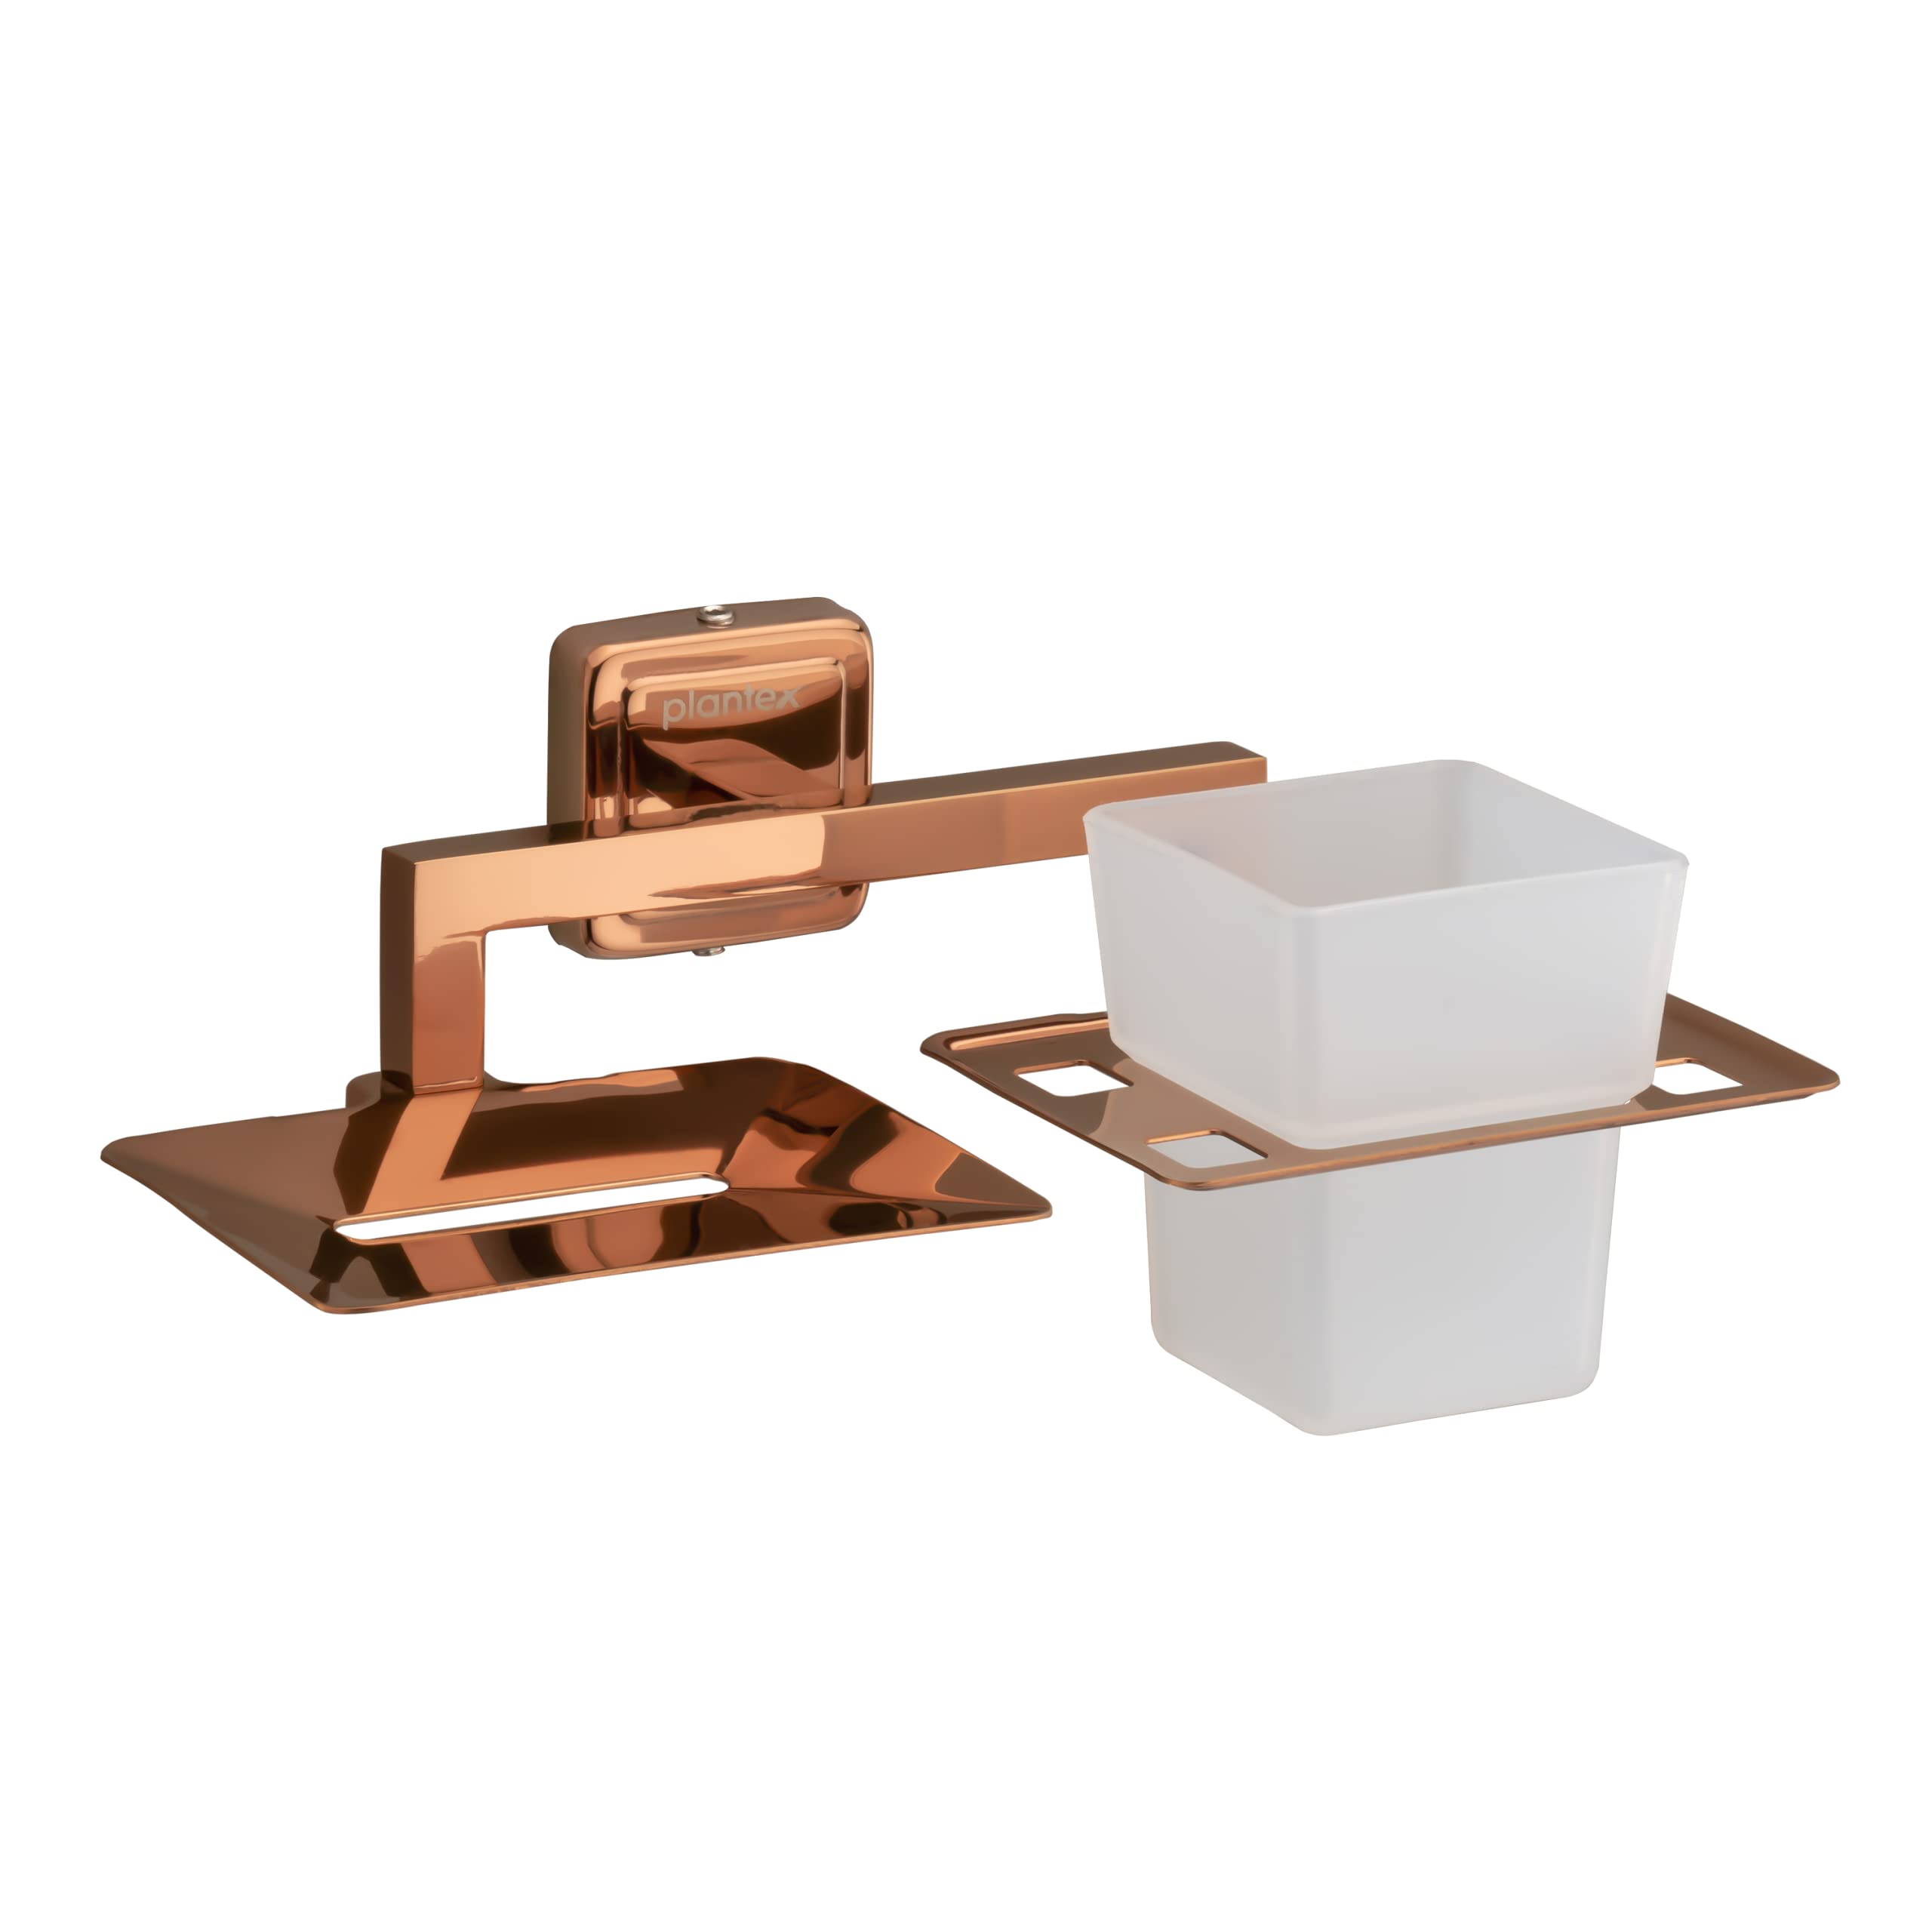 Plantex 304 Grade Stainless Steel 2in1 Bathroom Organizer - Soap Stand with Toothpaste and Brush Holder Pack of 2, Decan (Rose Gold)